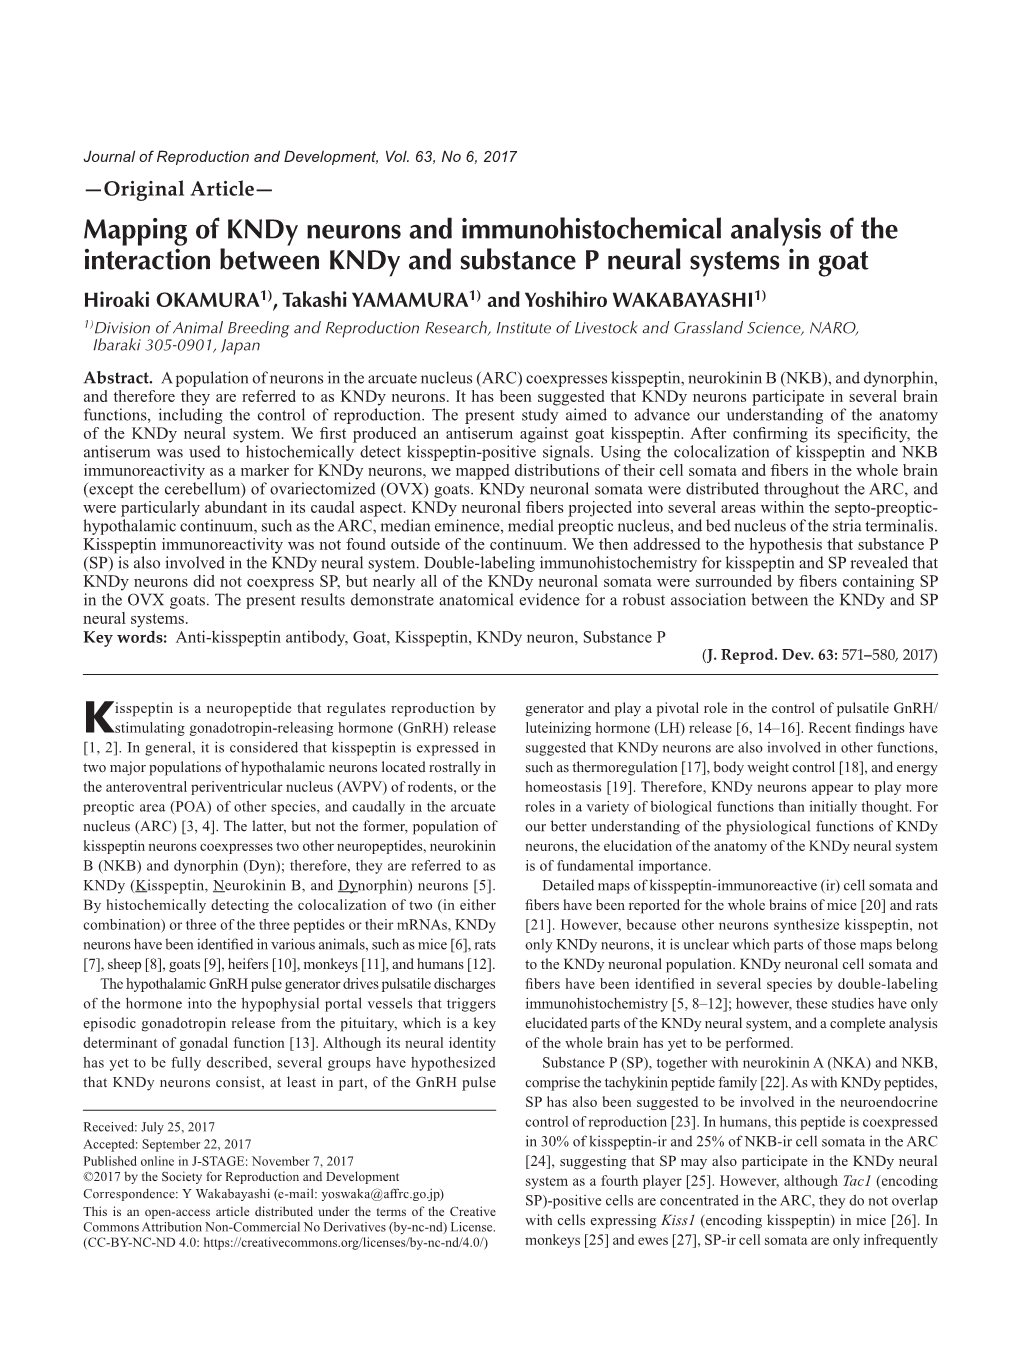 Mapping of Kndy Neurons and Immunohistochemical Analysis Of